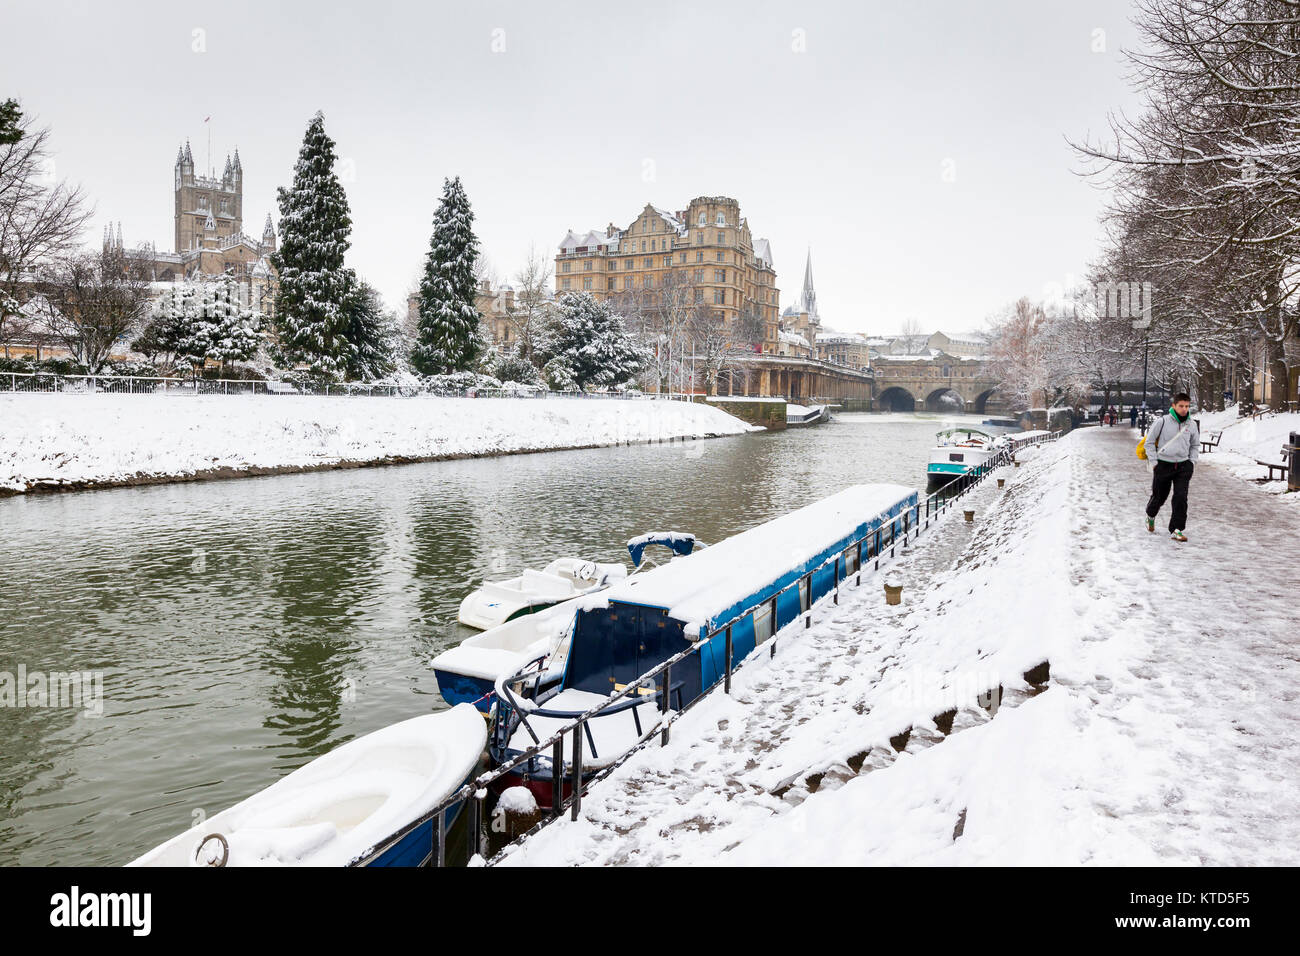 BATH, UK - 19 JANUARY, 2013:  Snow covered canal boats moored along the River Avon in Central Bath with Bath Abbey, Great Pulteney Bridge and the Empi Stock Photo